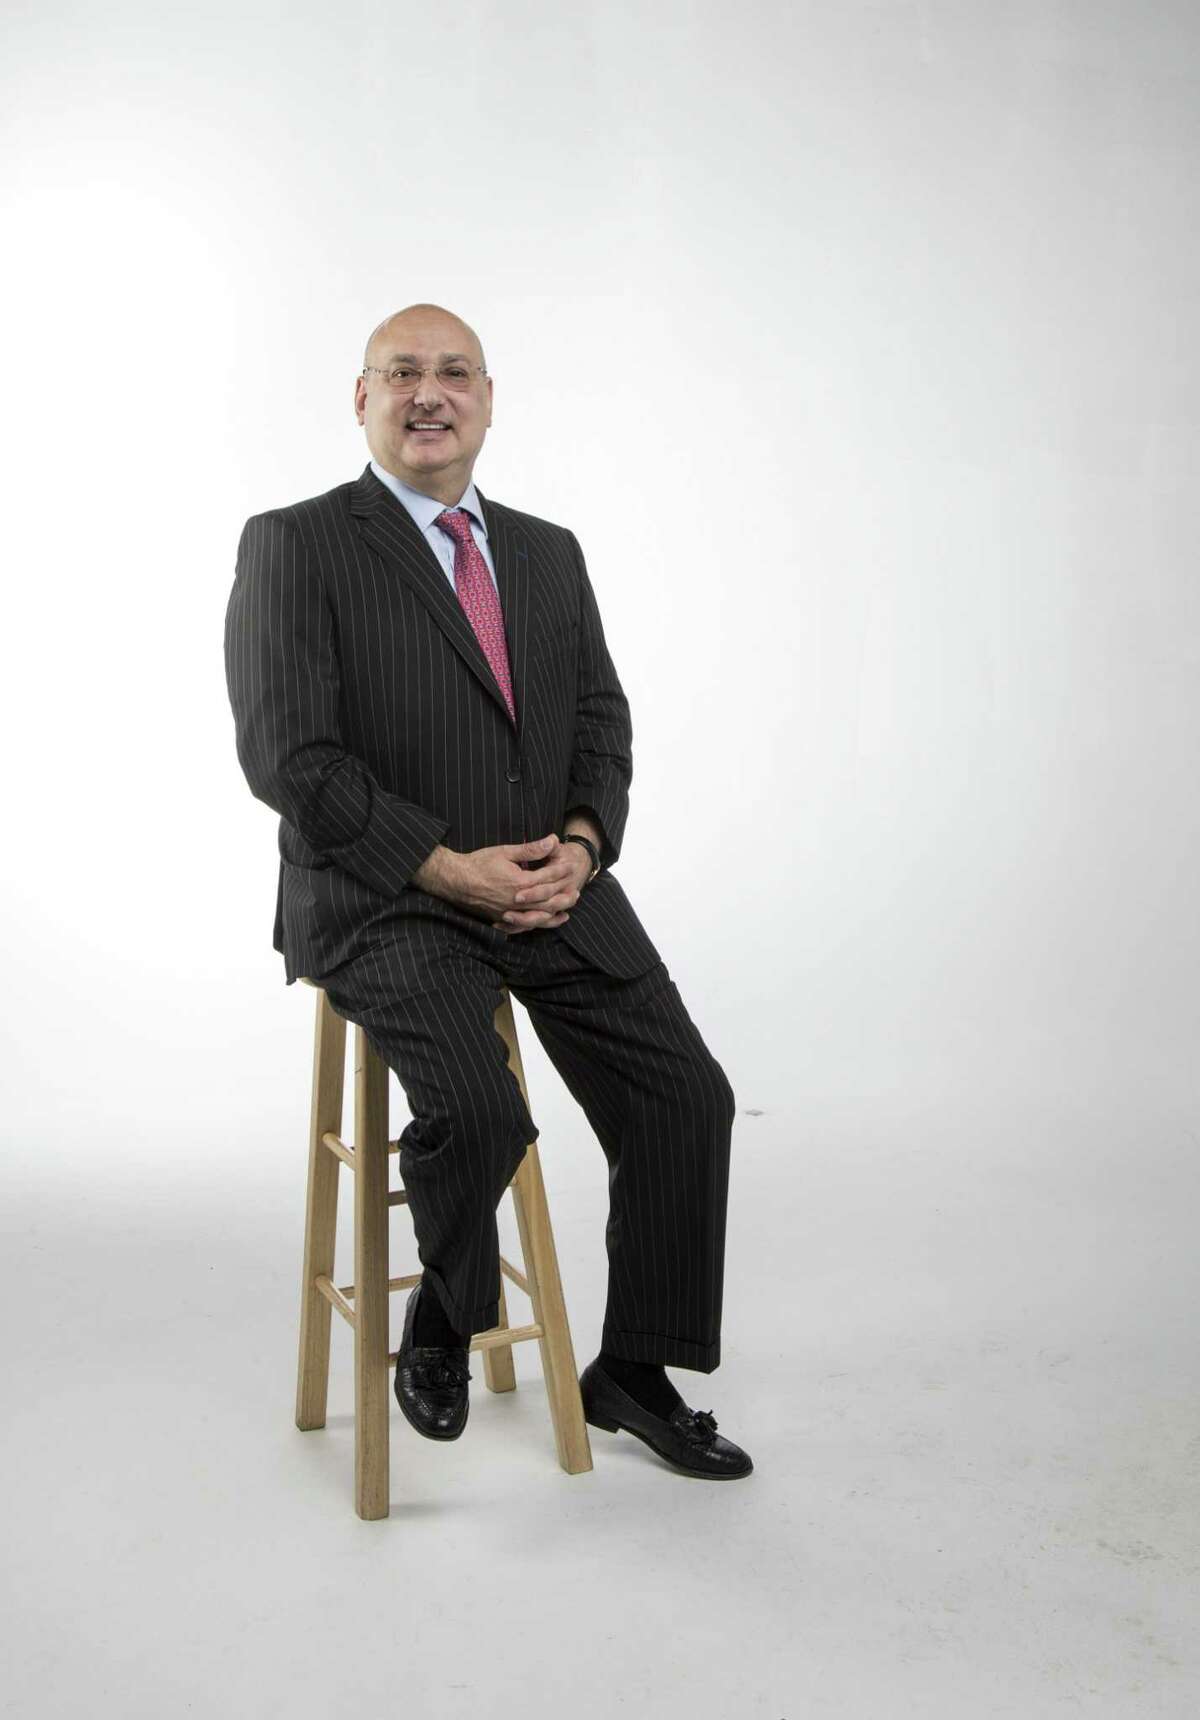 Gilbert Garcia, managing partner of Garcia, Hamilton and Associates, poses for a portrait in the Houston Chronicle photo studio Tuesday, Aug. 14, 2018, in Houston.